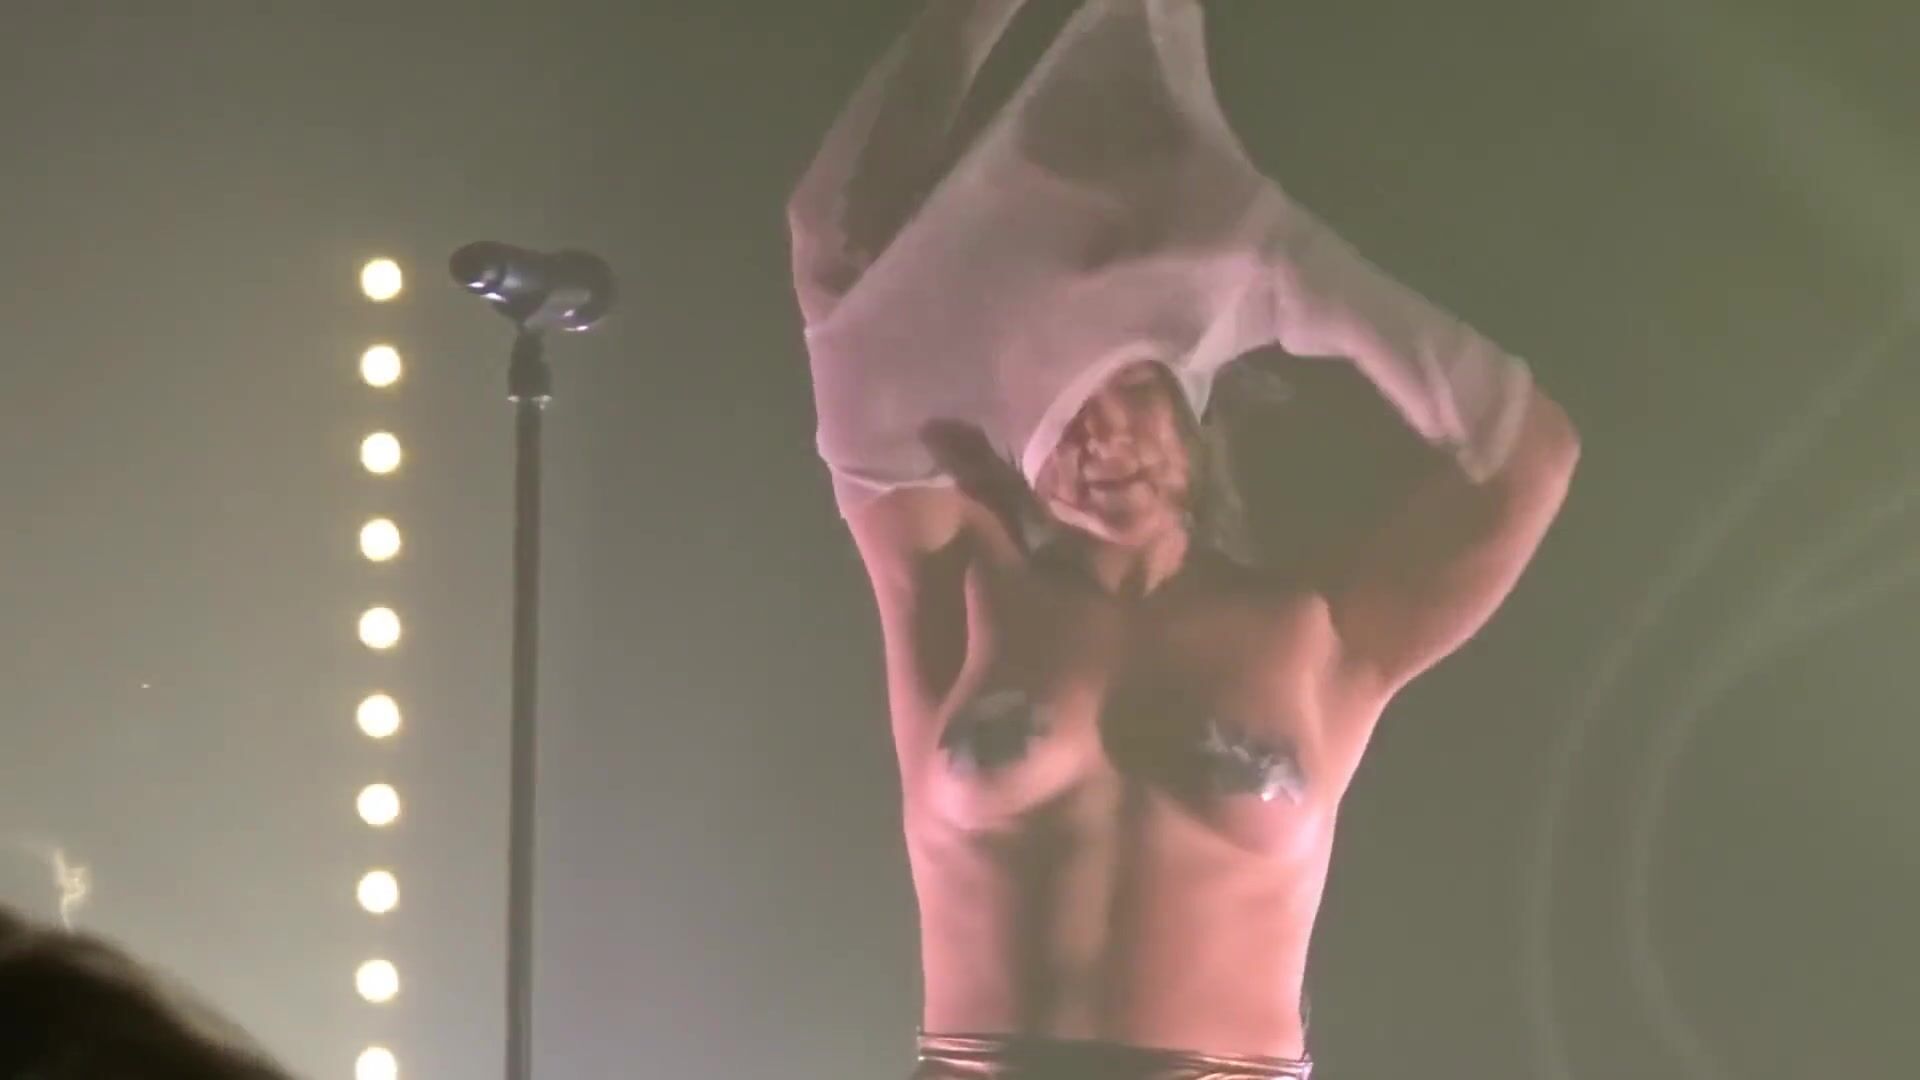 Uncut Concert moments full of shame and excitement when Tove Lo nude exposes boobies on stage Stroking